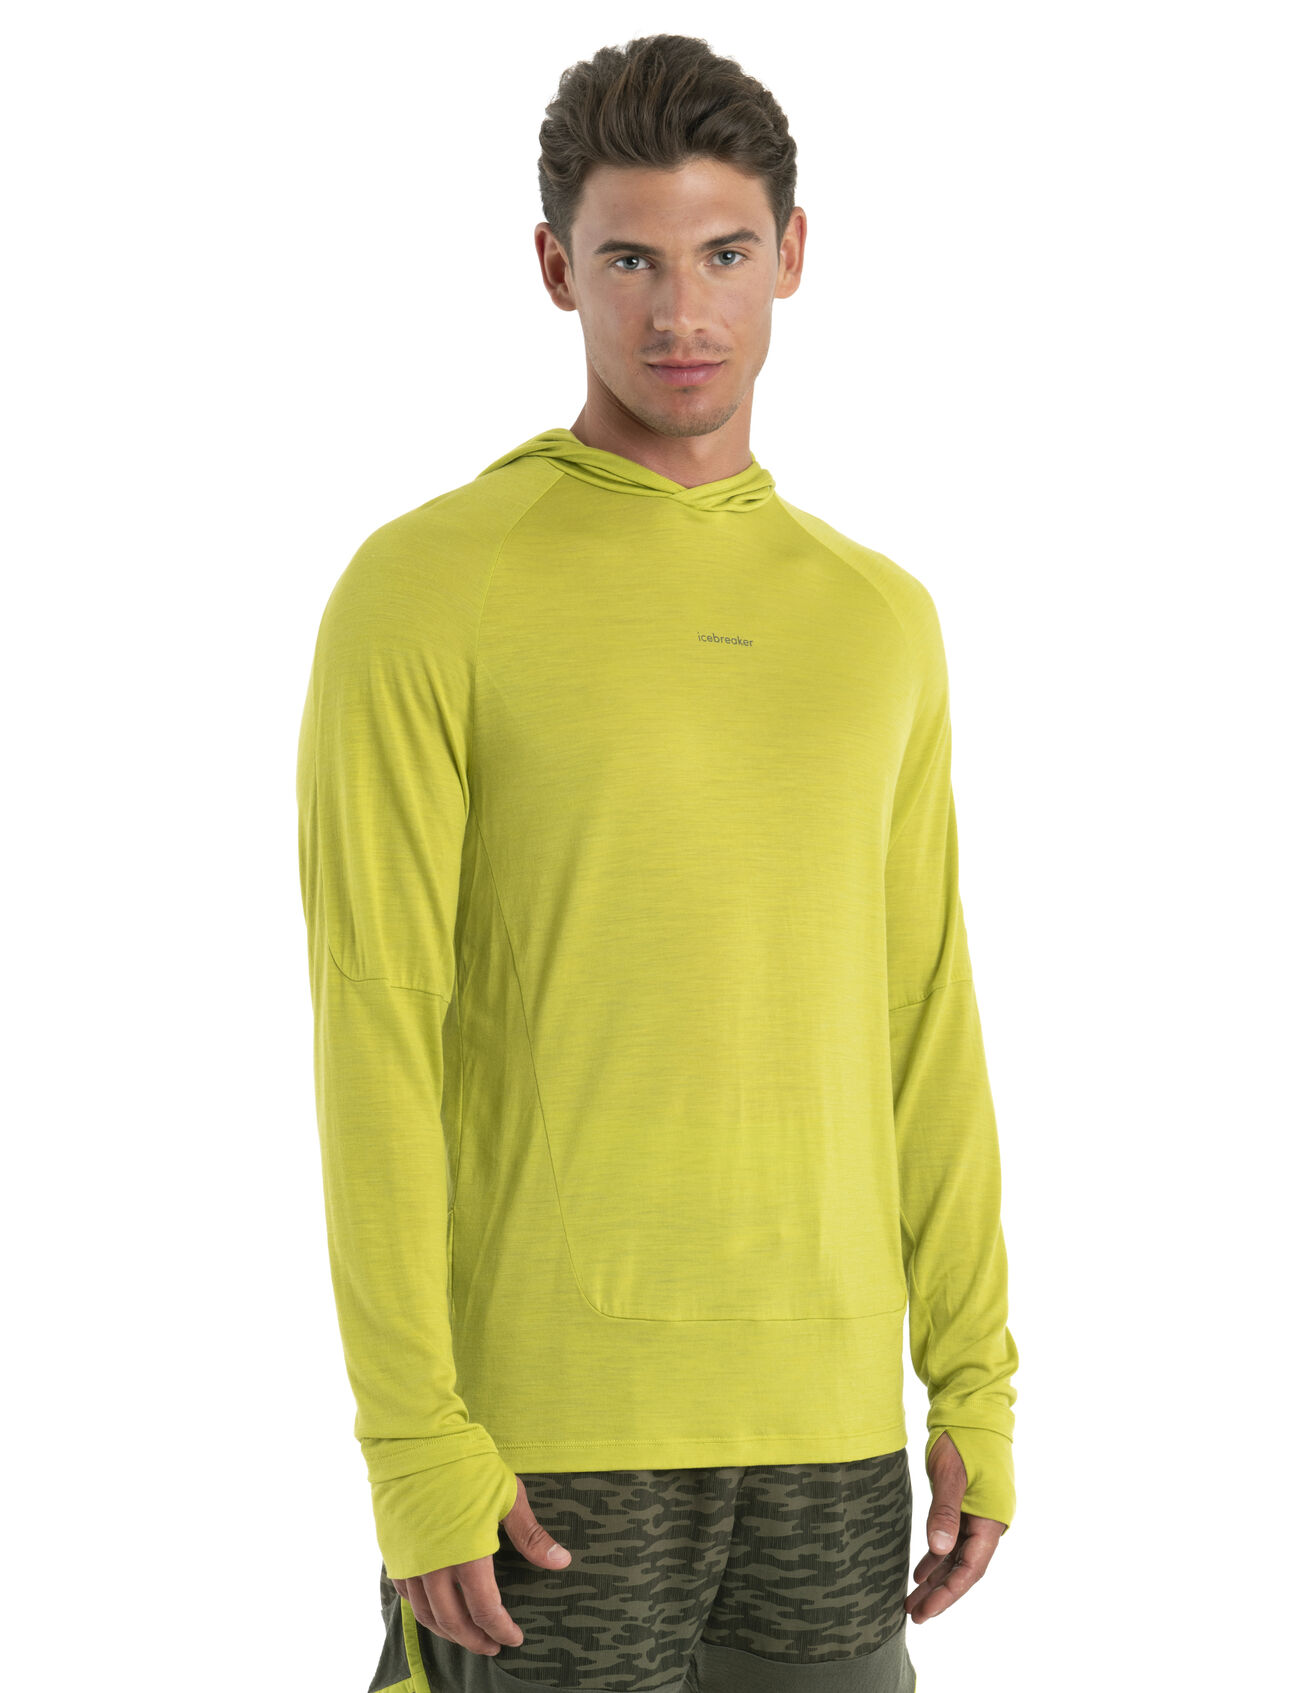 Mens 125 Cool-Lite™ Sphere Merino Long Sleeve Hoodie A lightweight and breathable performance hoodie designed for aerobic days outside, the Cool-Lite™ Hoodie features our moisture-wicking Cool-Lite™ merino jersey fabric.